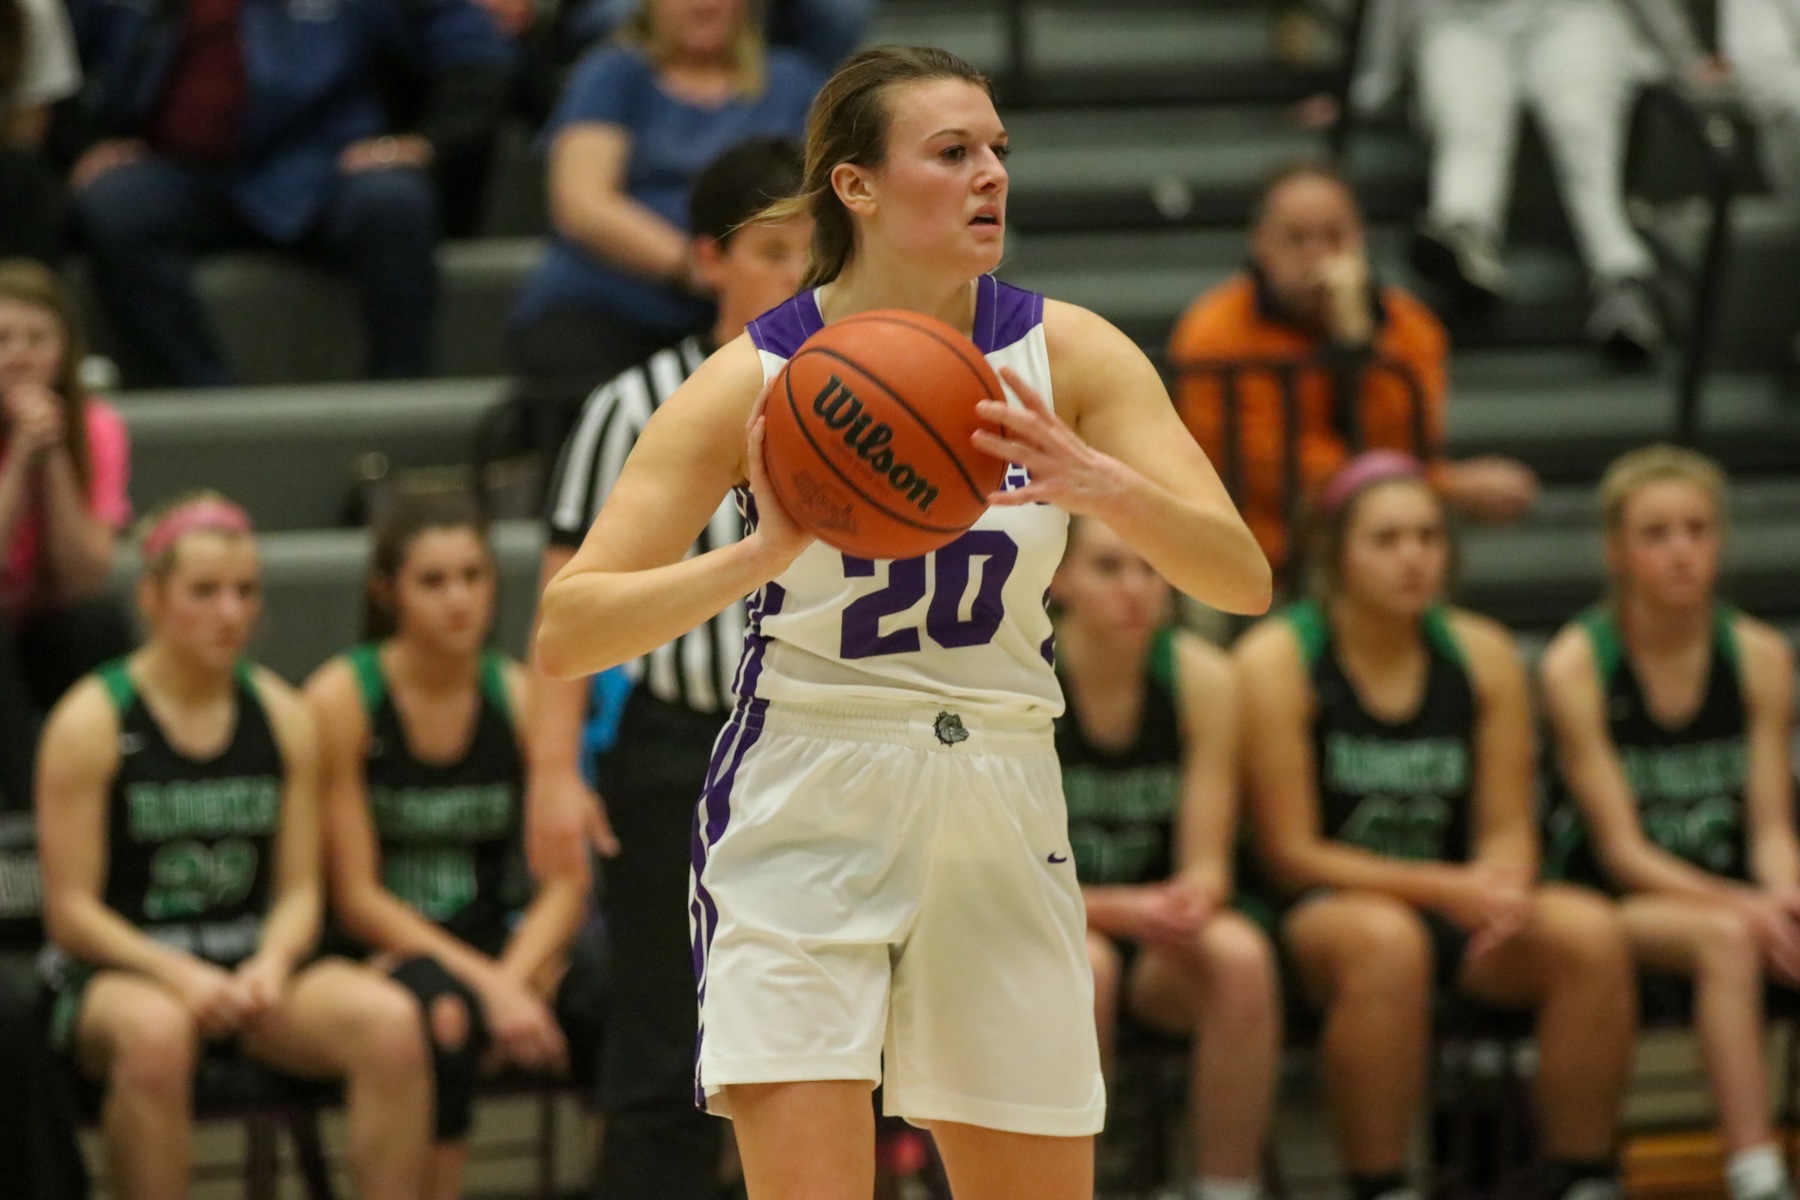 No.13/17 @bhsdogsghoops holds off surge from Zionsville to beat Eagles, 58-51